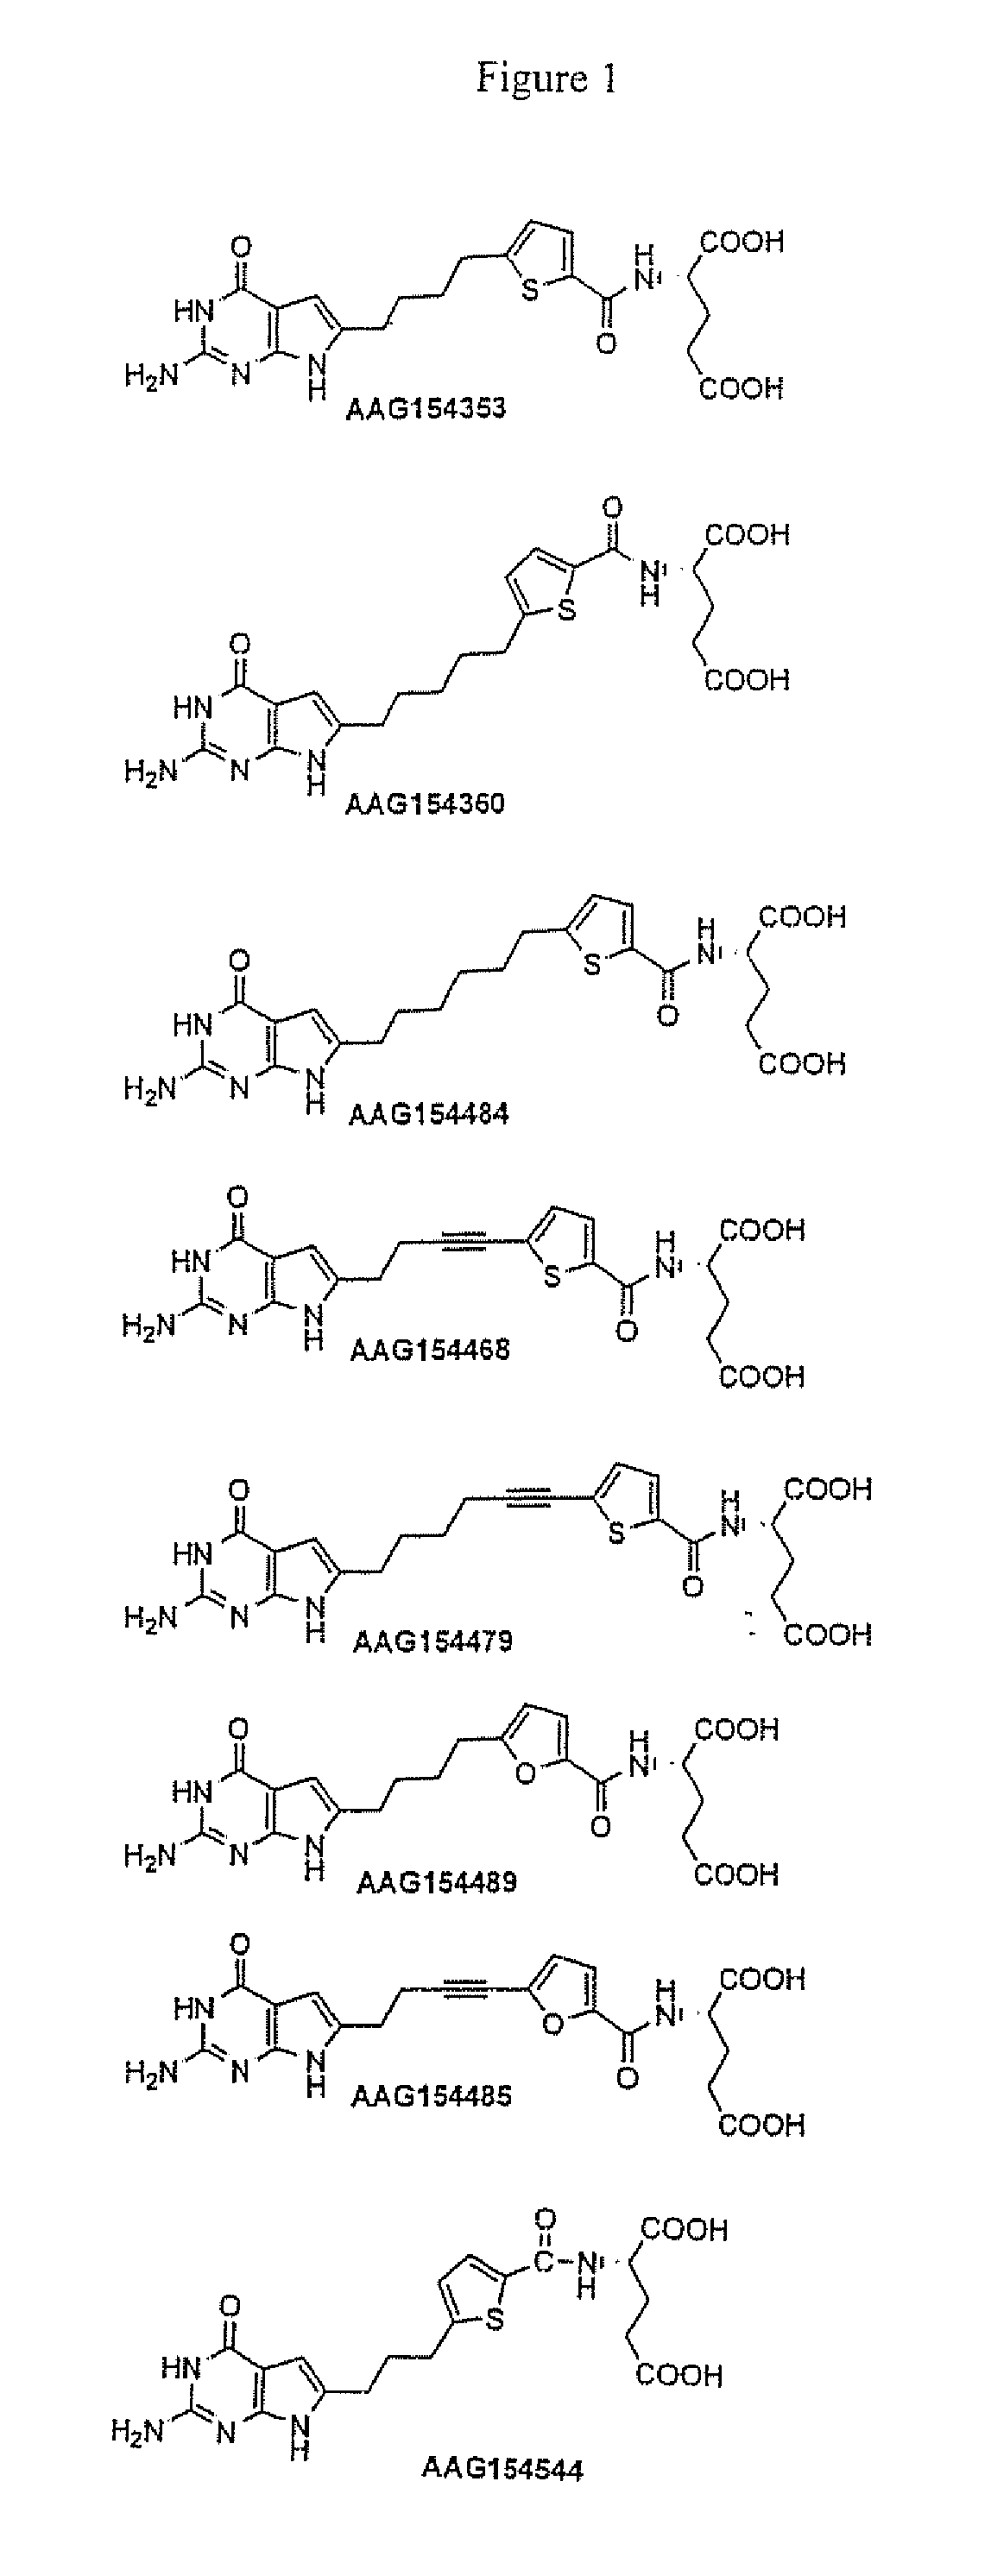 Selective proton coupled folate transporter and folate receptor, and garftase inhibitor compounds and methods of using the same